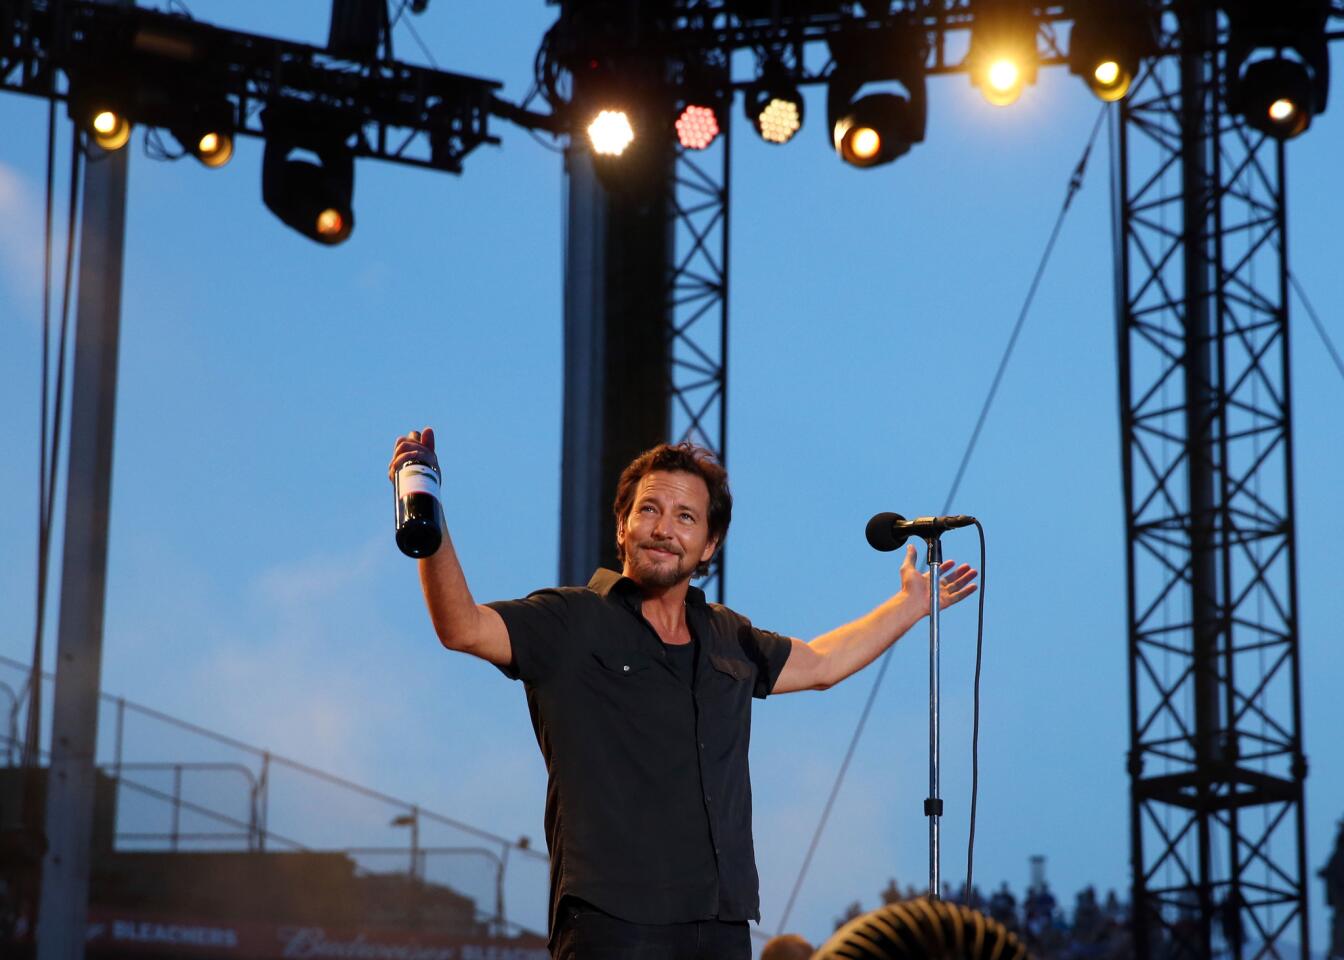 Eddie Vedder and Pearl Jam perform on Friday at Wrigley Field.